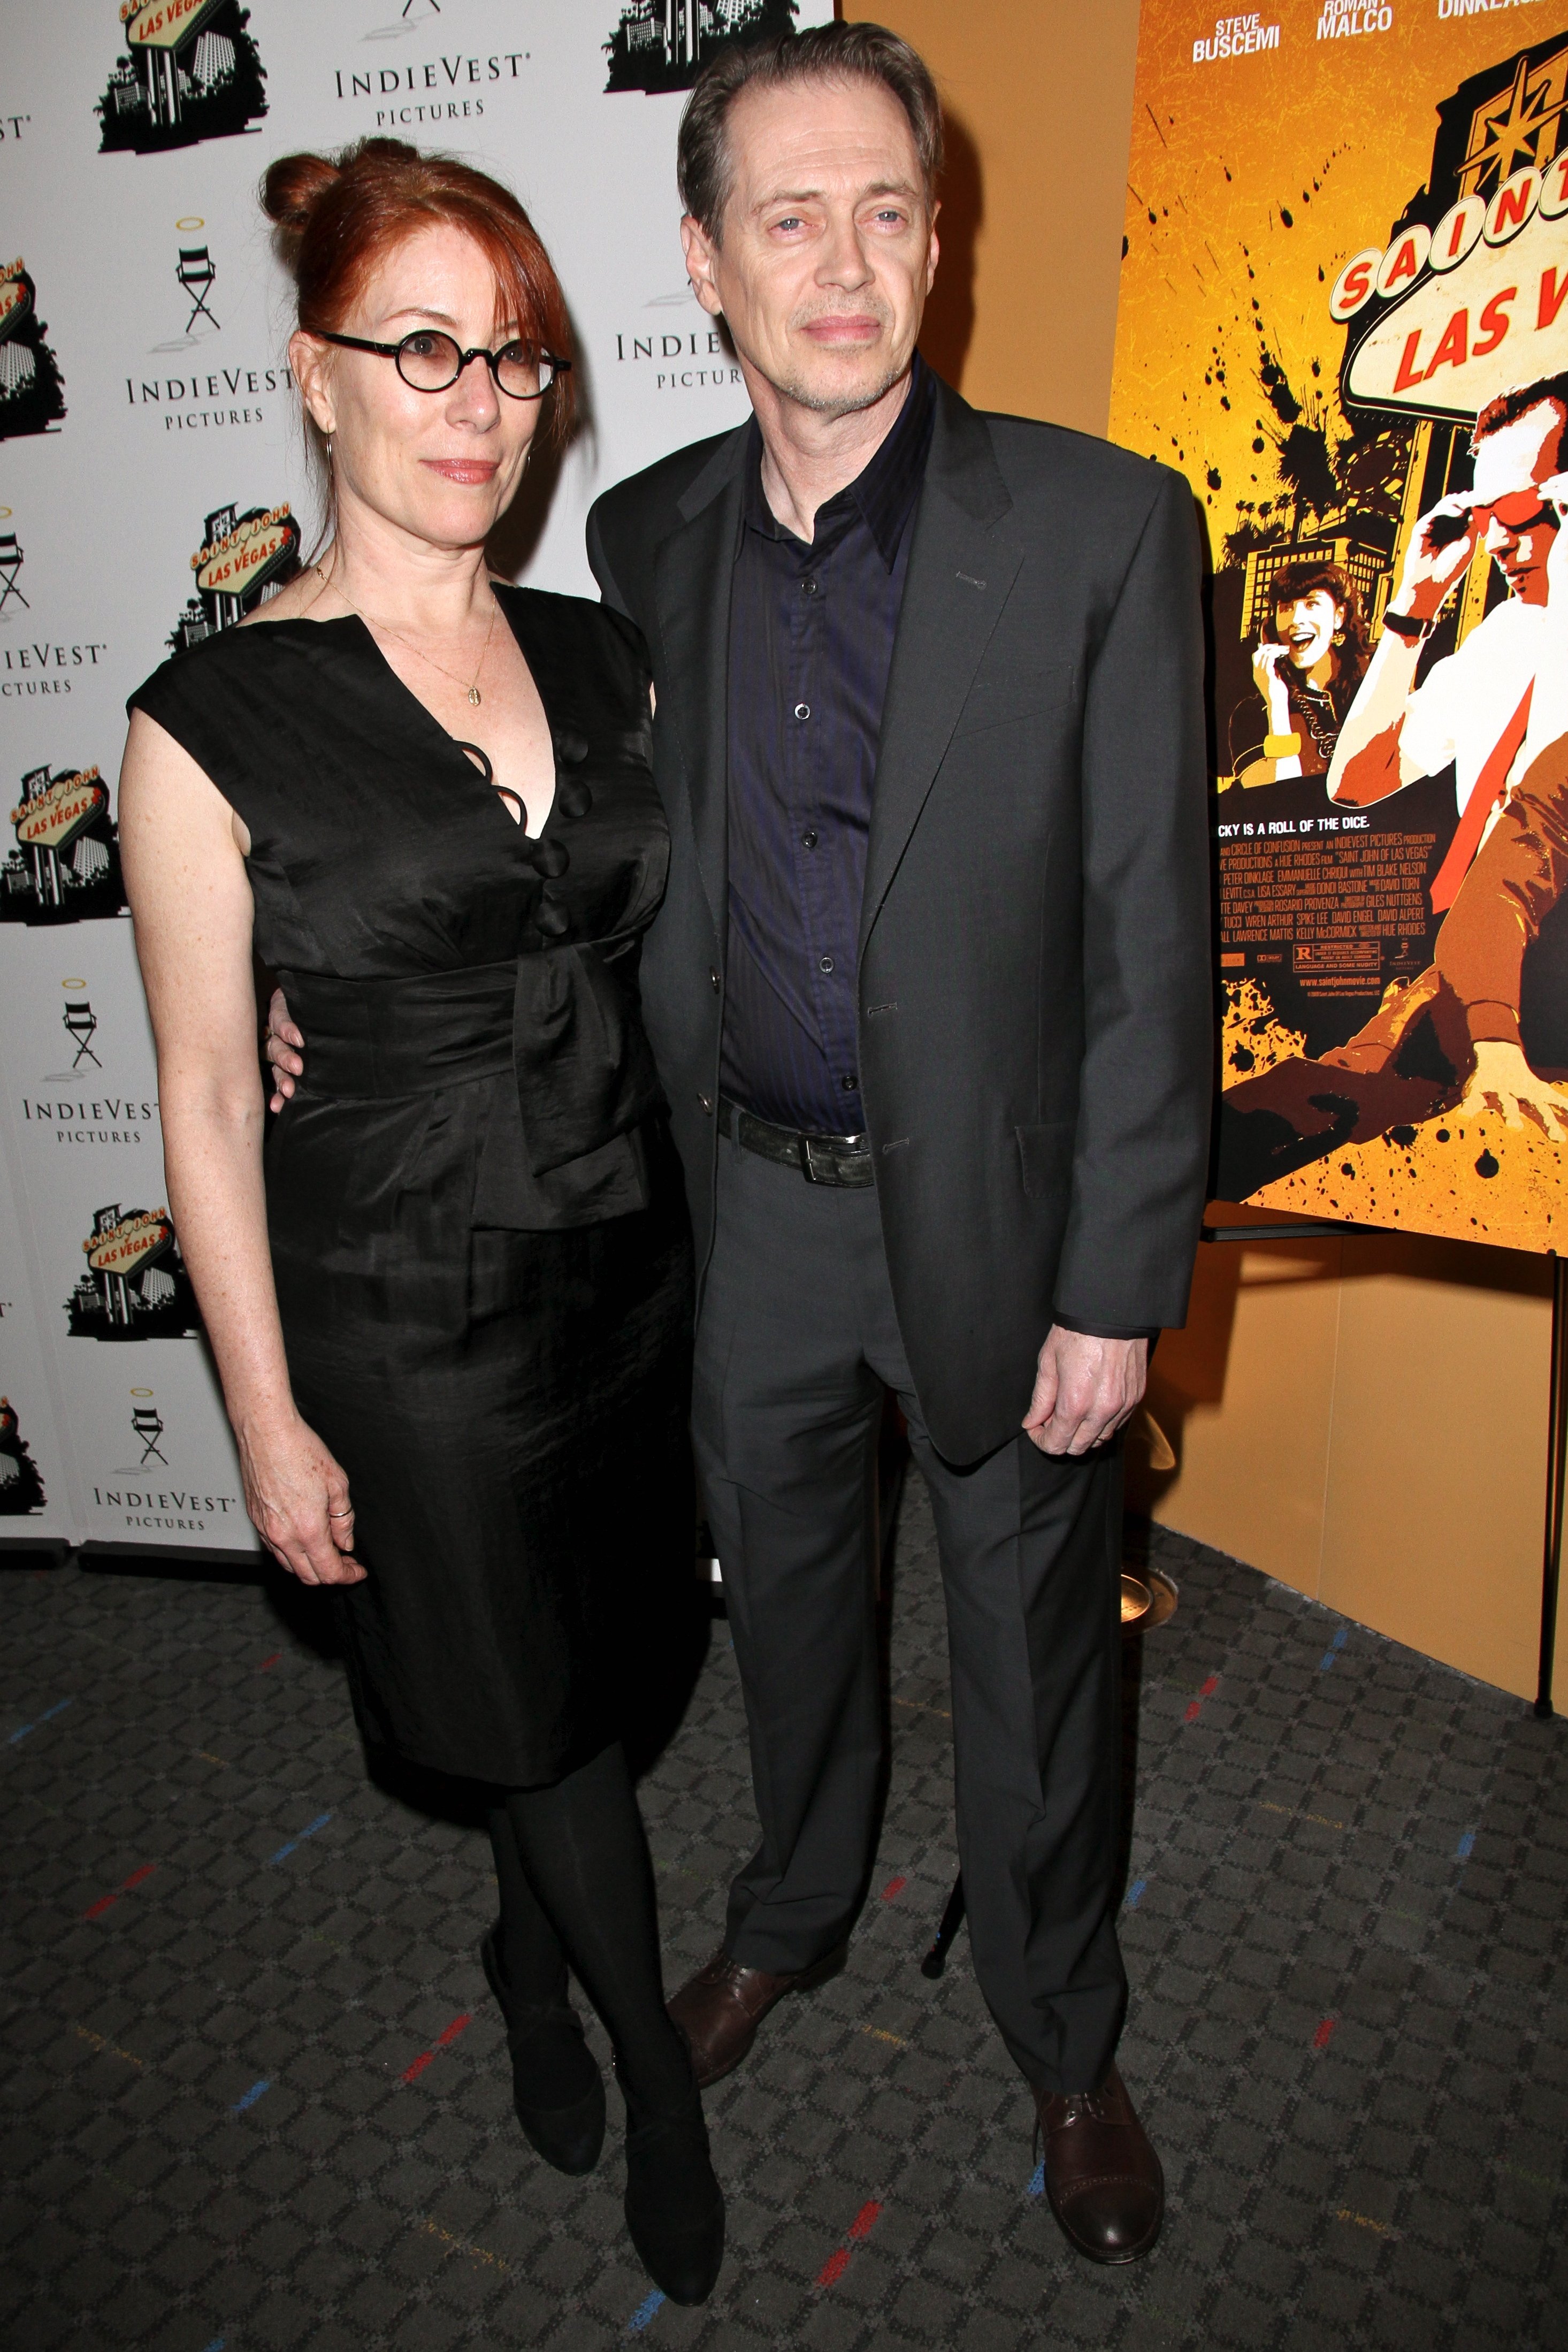 Steve Buscemi and wife Jo Andres attend the "Saint John Of Las Vegas" New York Premiere on January 16th, 2010 in NYC | Photo: Shutterstock